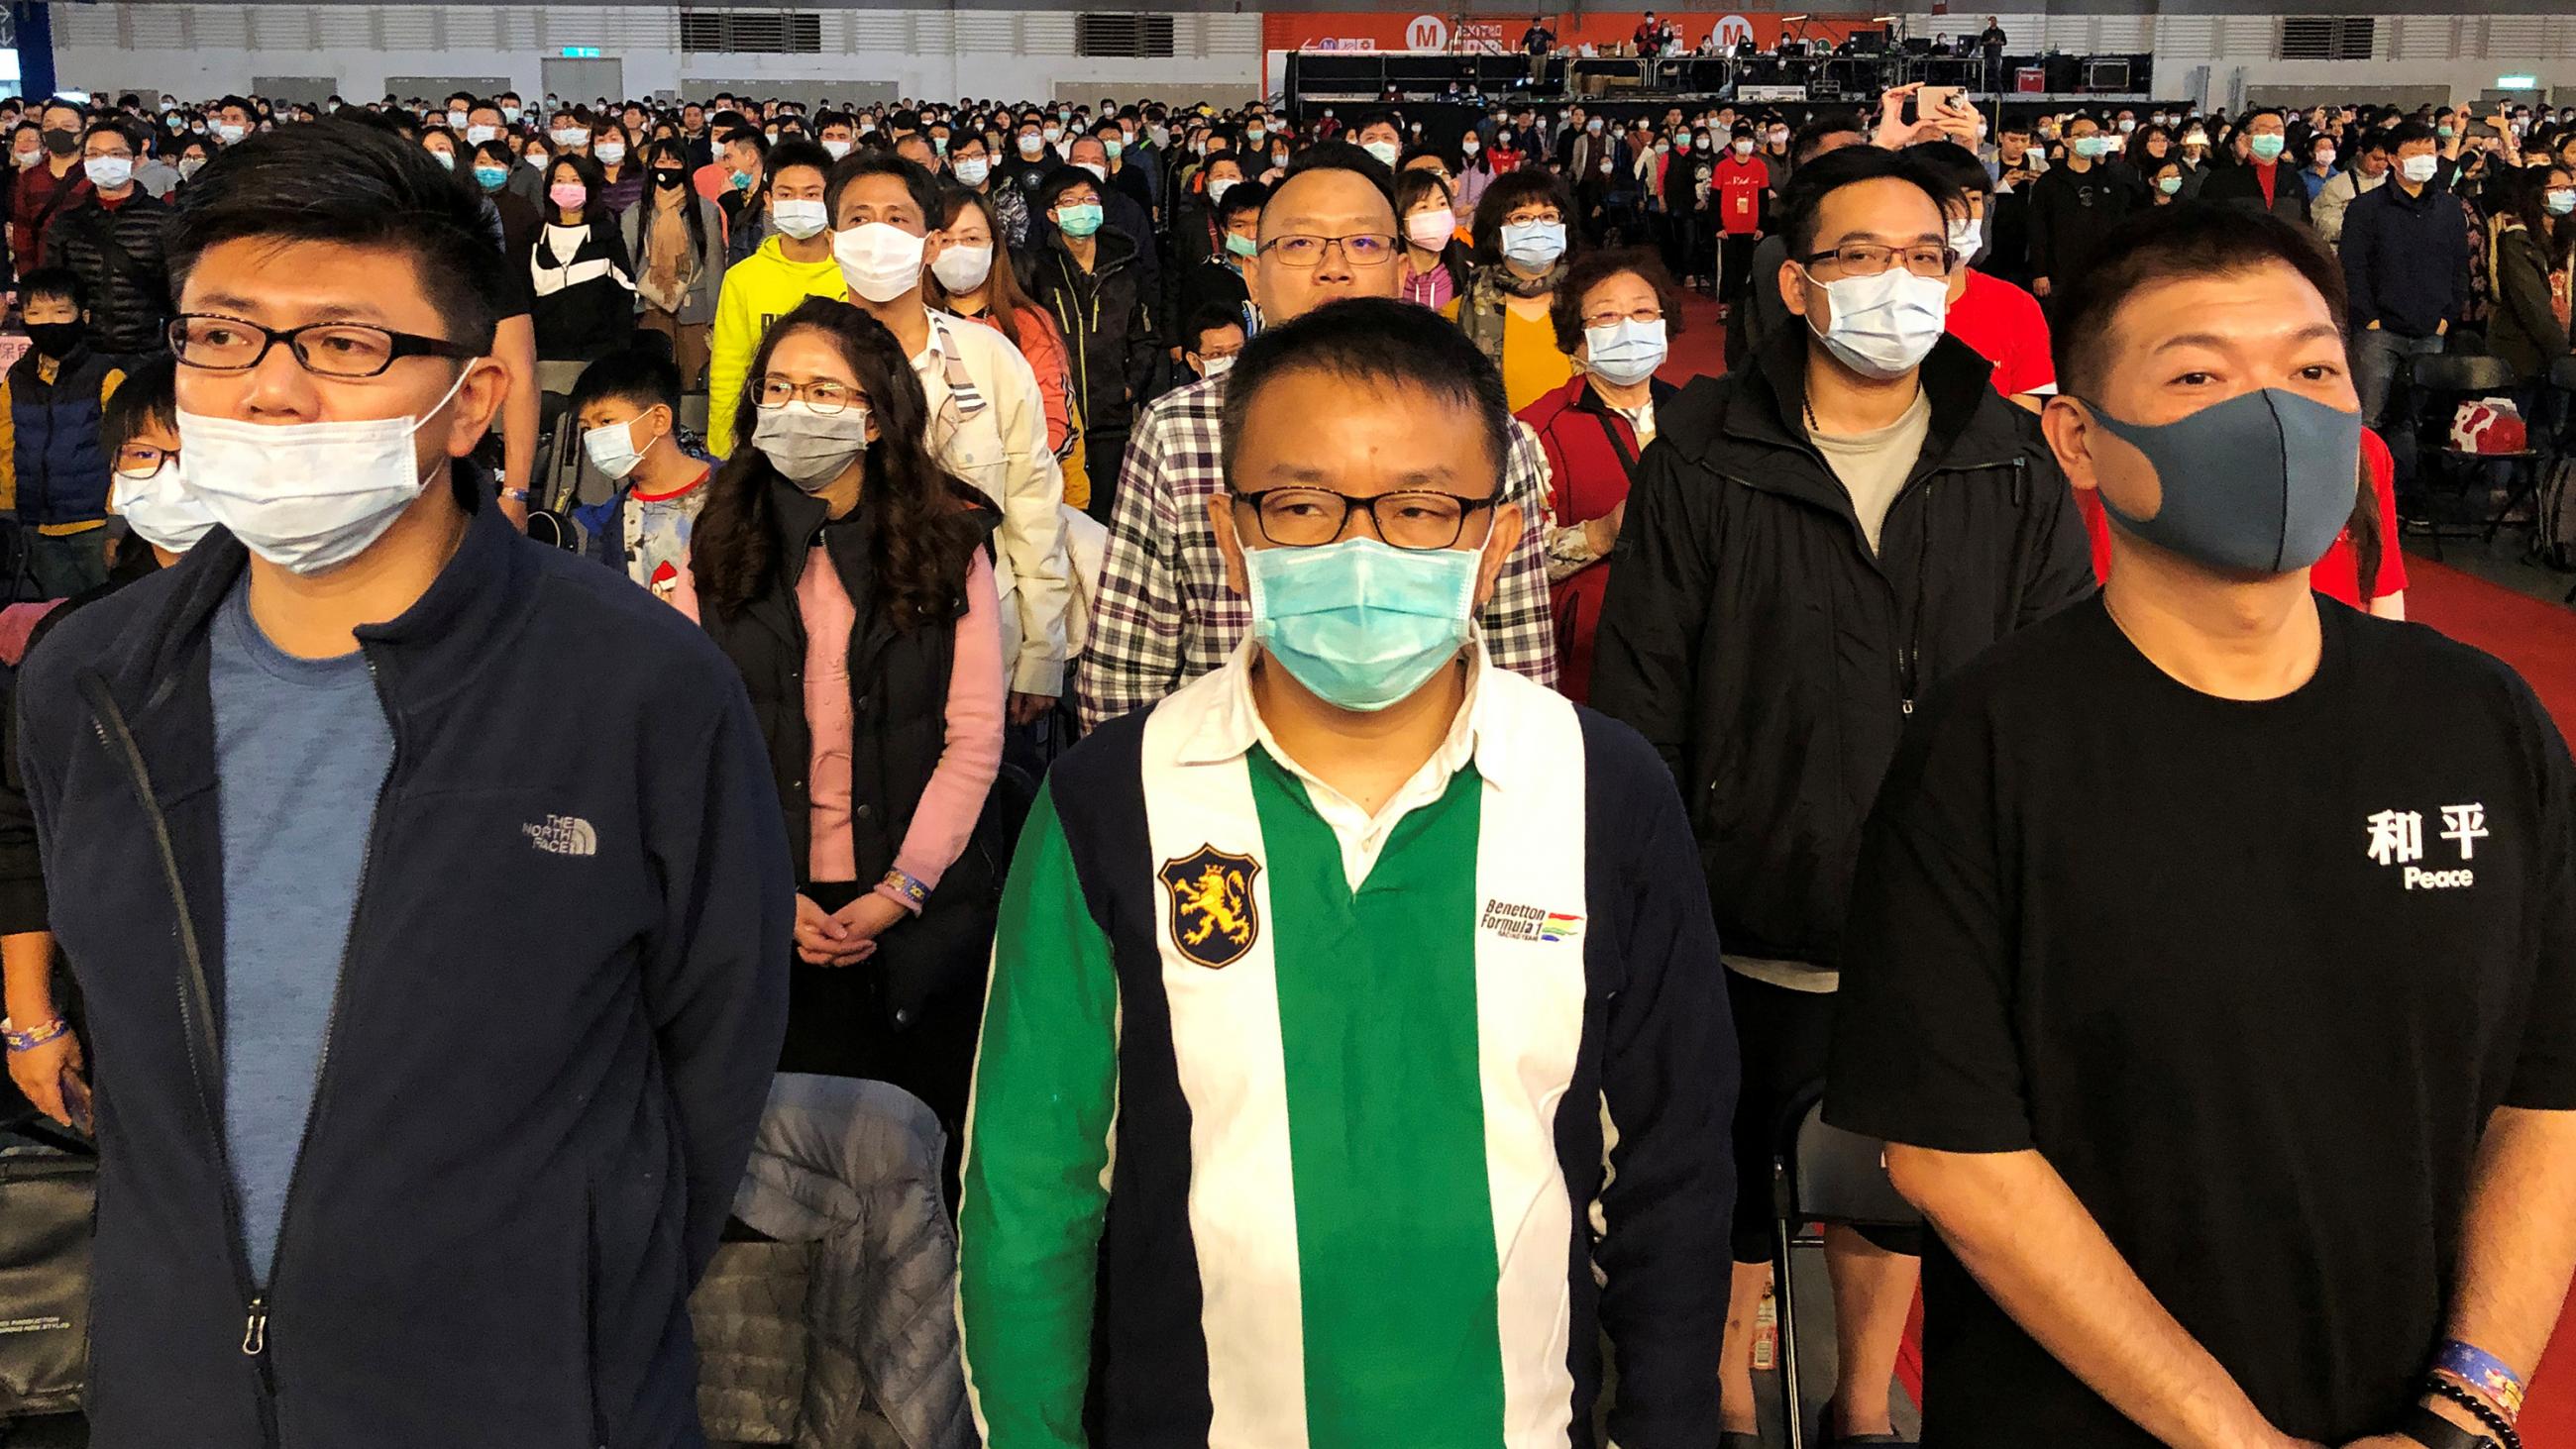 The photo shows a massive arena-like space filled with people, almost all of whom are wearing face masks.